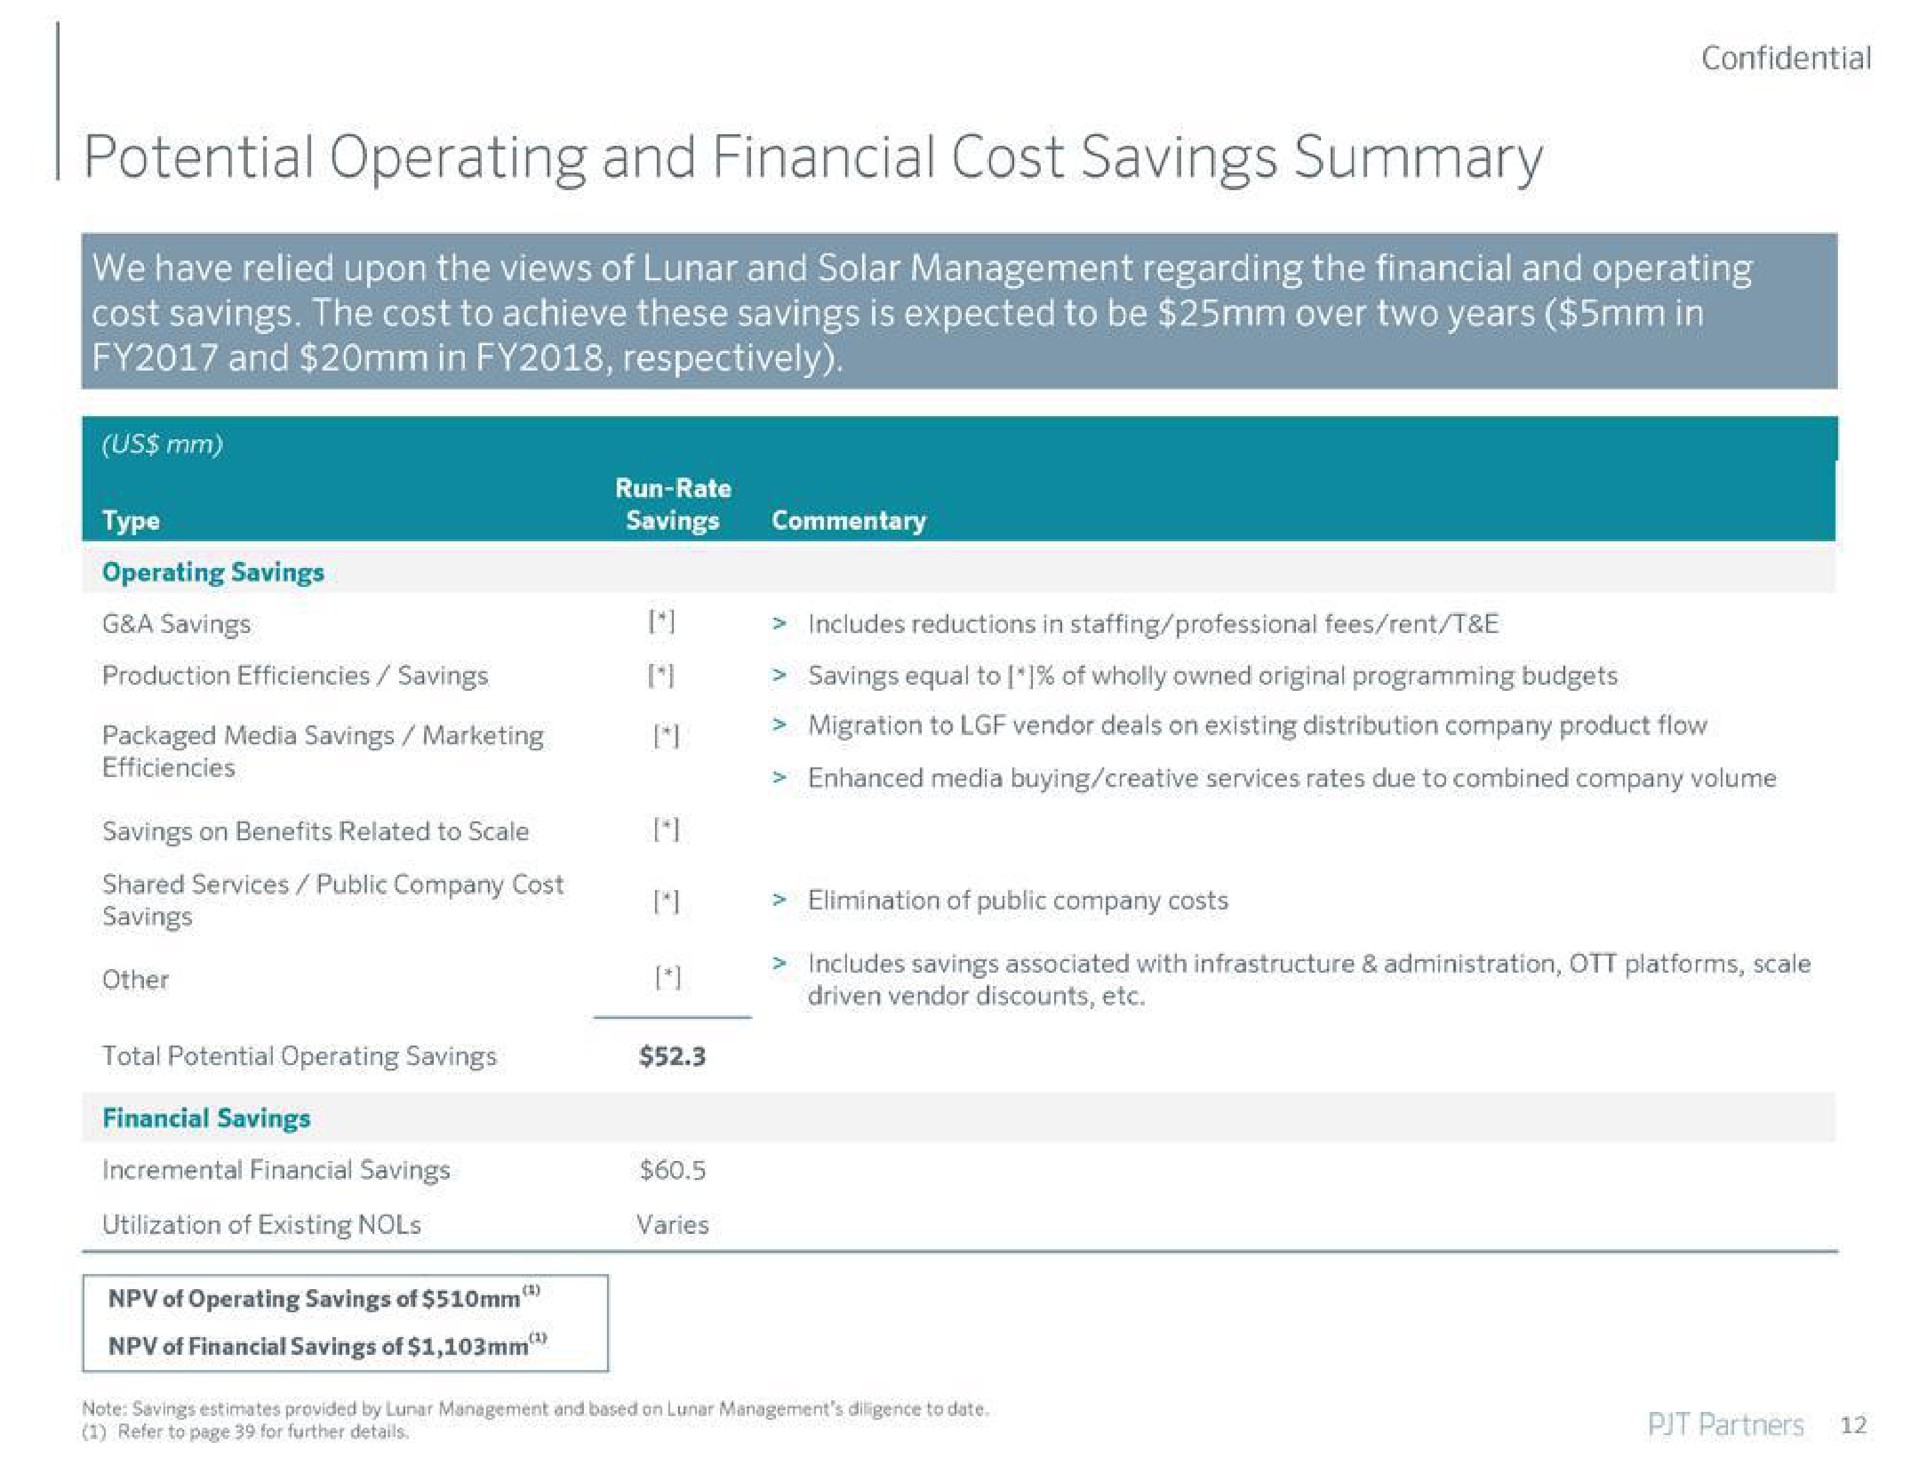 potential operating and financial cost savings summary | PJT Partners